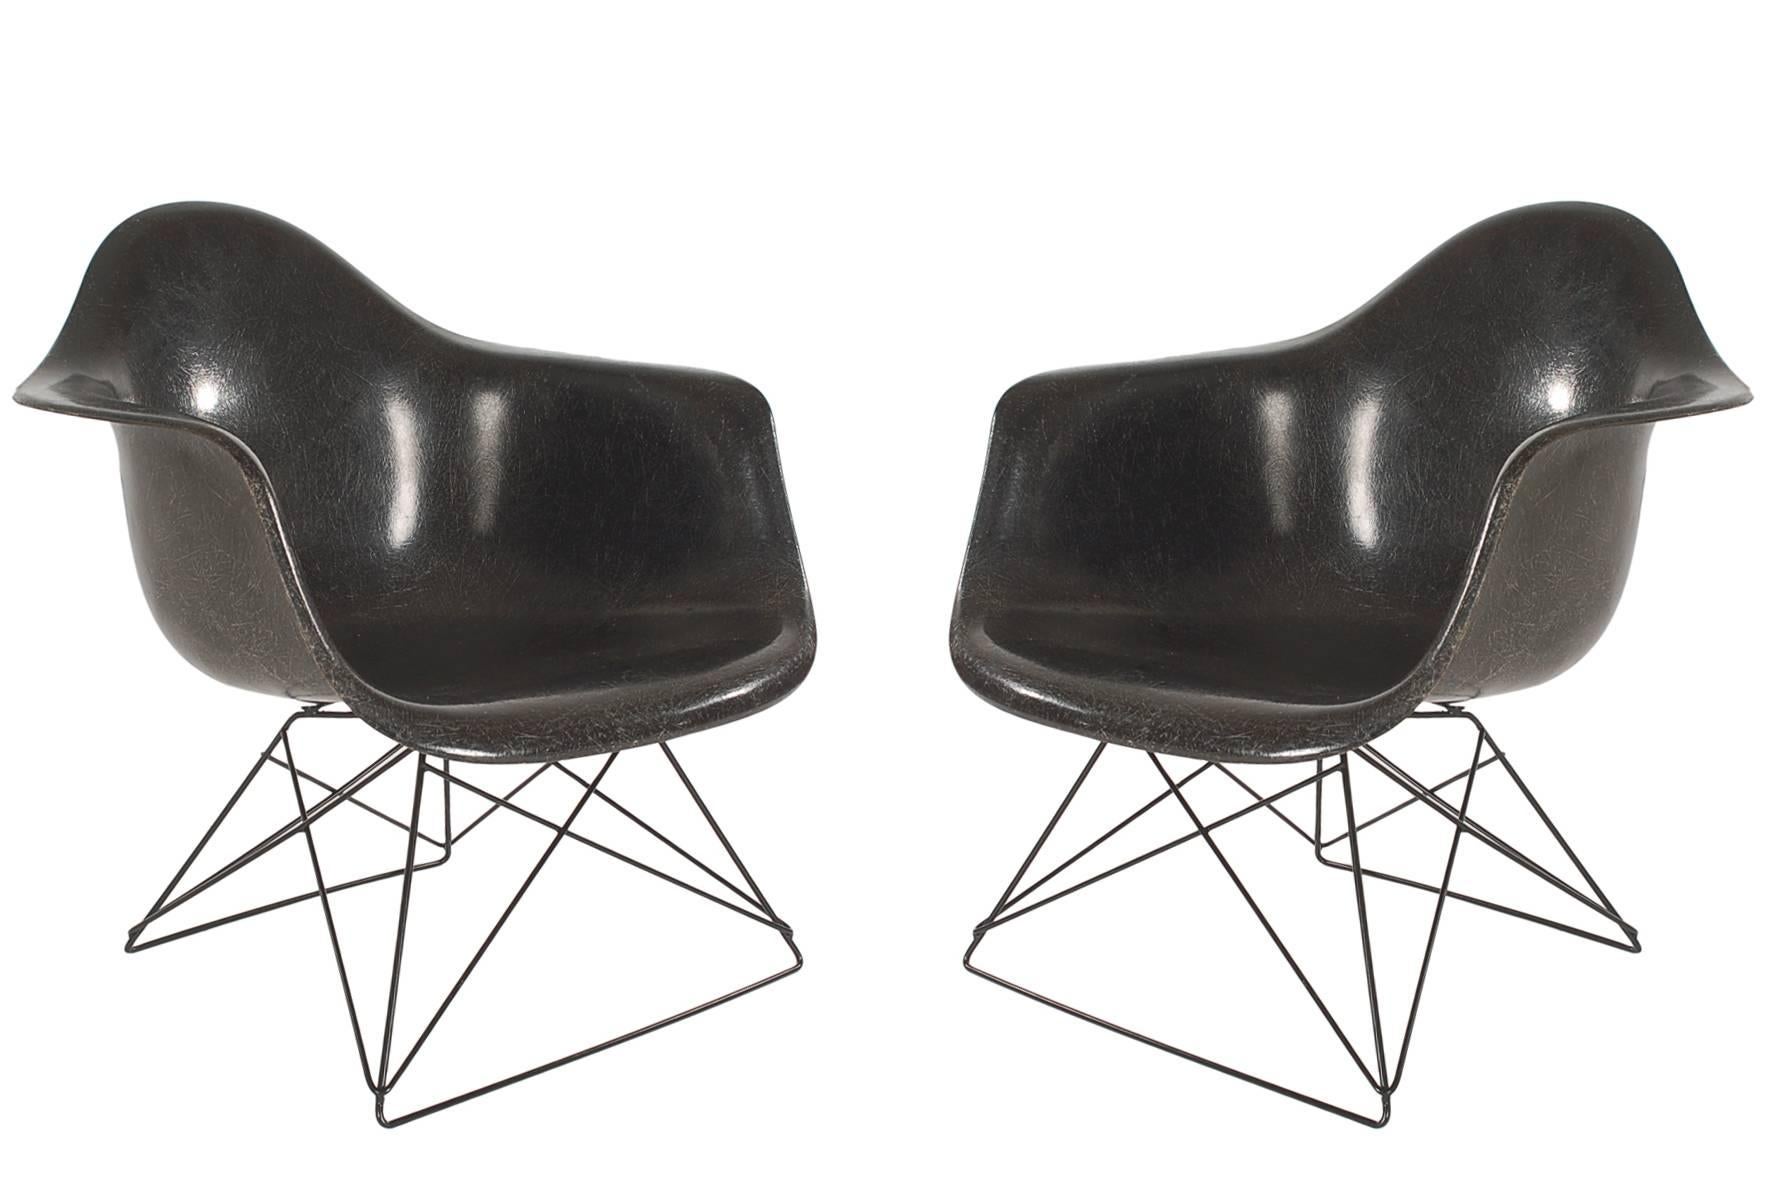 Here we have an iconic design Classic from the Mid-Century Modern period. This vintage fiberglass shell chair was designed by Charles Eames and produced by Herman Miller, circa 1972. In a very hard to find jet black color. The chair seats are